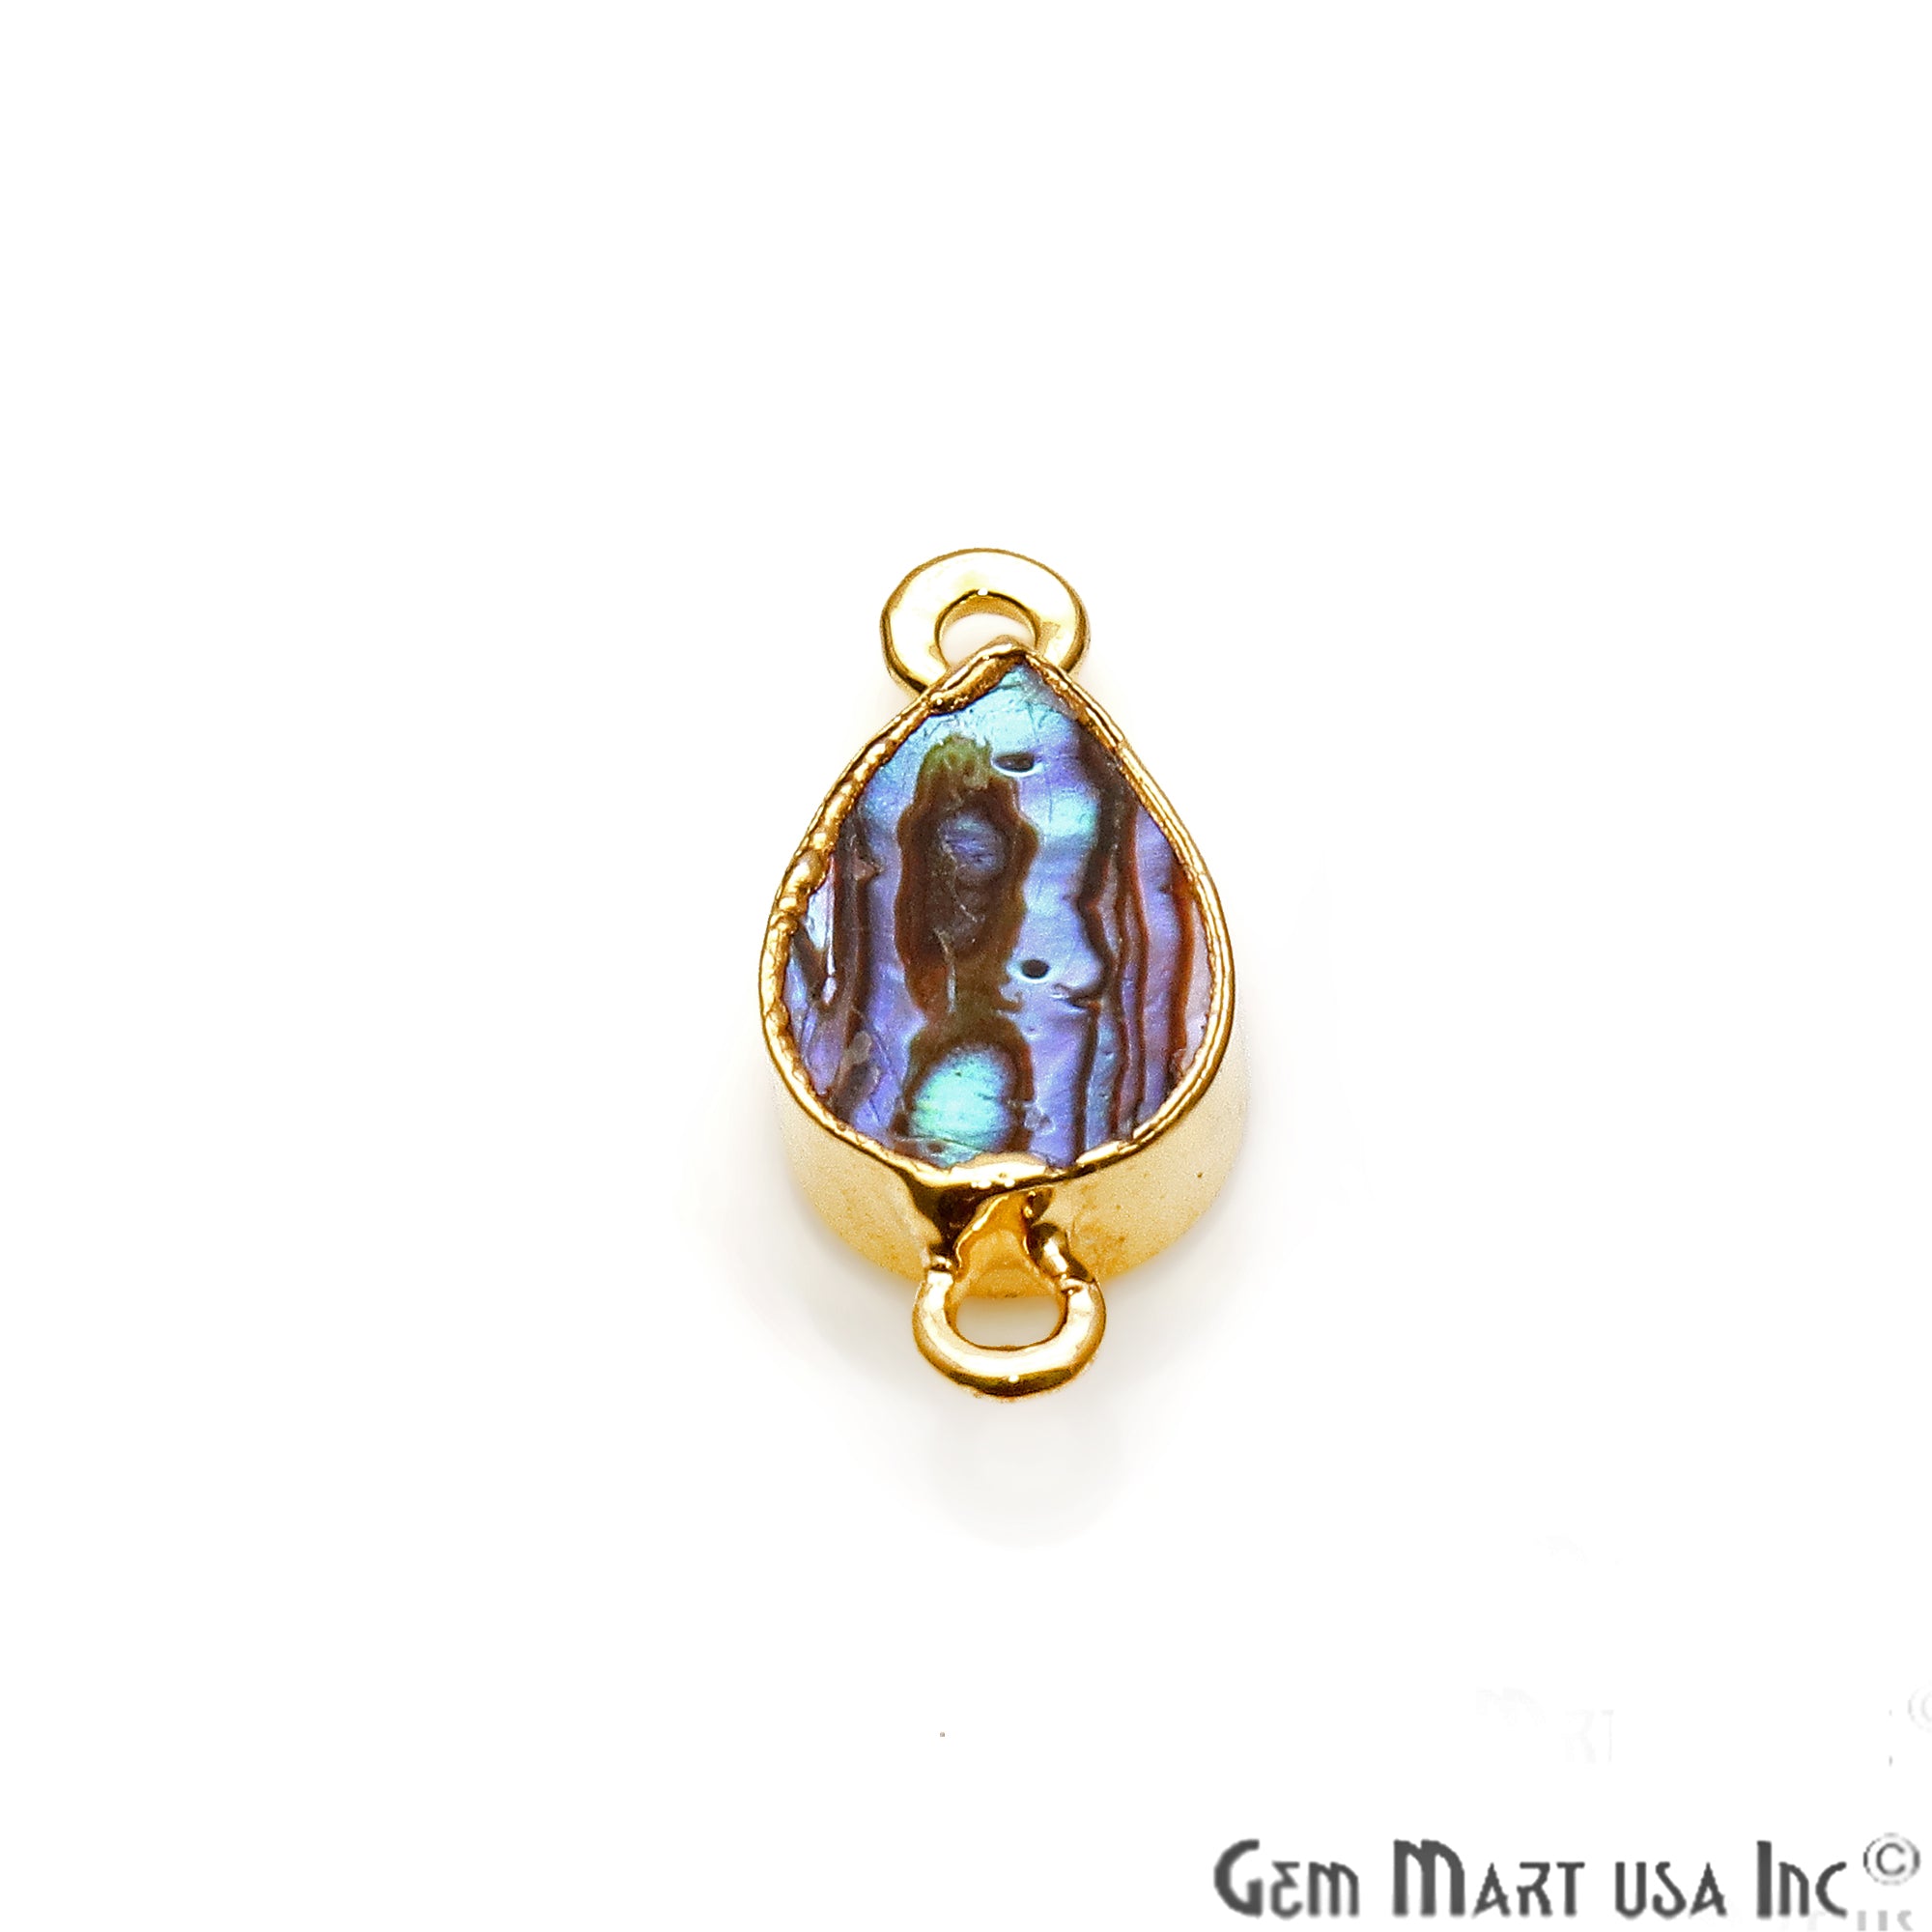 Abalone Shell 8x12mm Pears Double Bail Gold Electroplated Connector - GemMartUSA